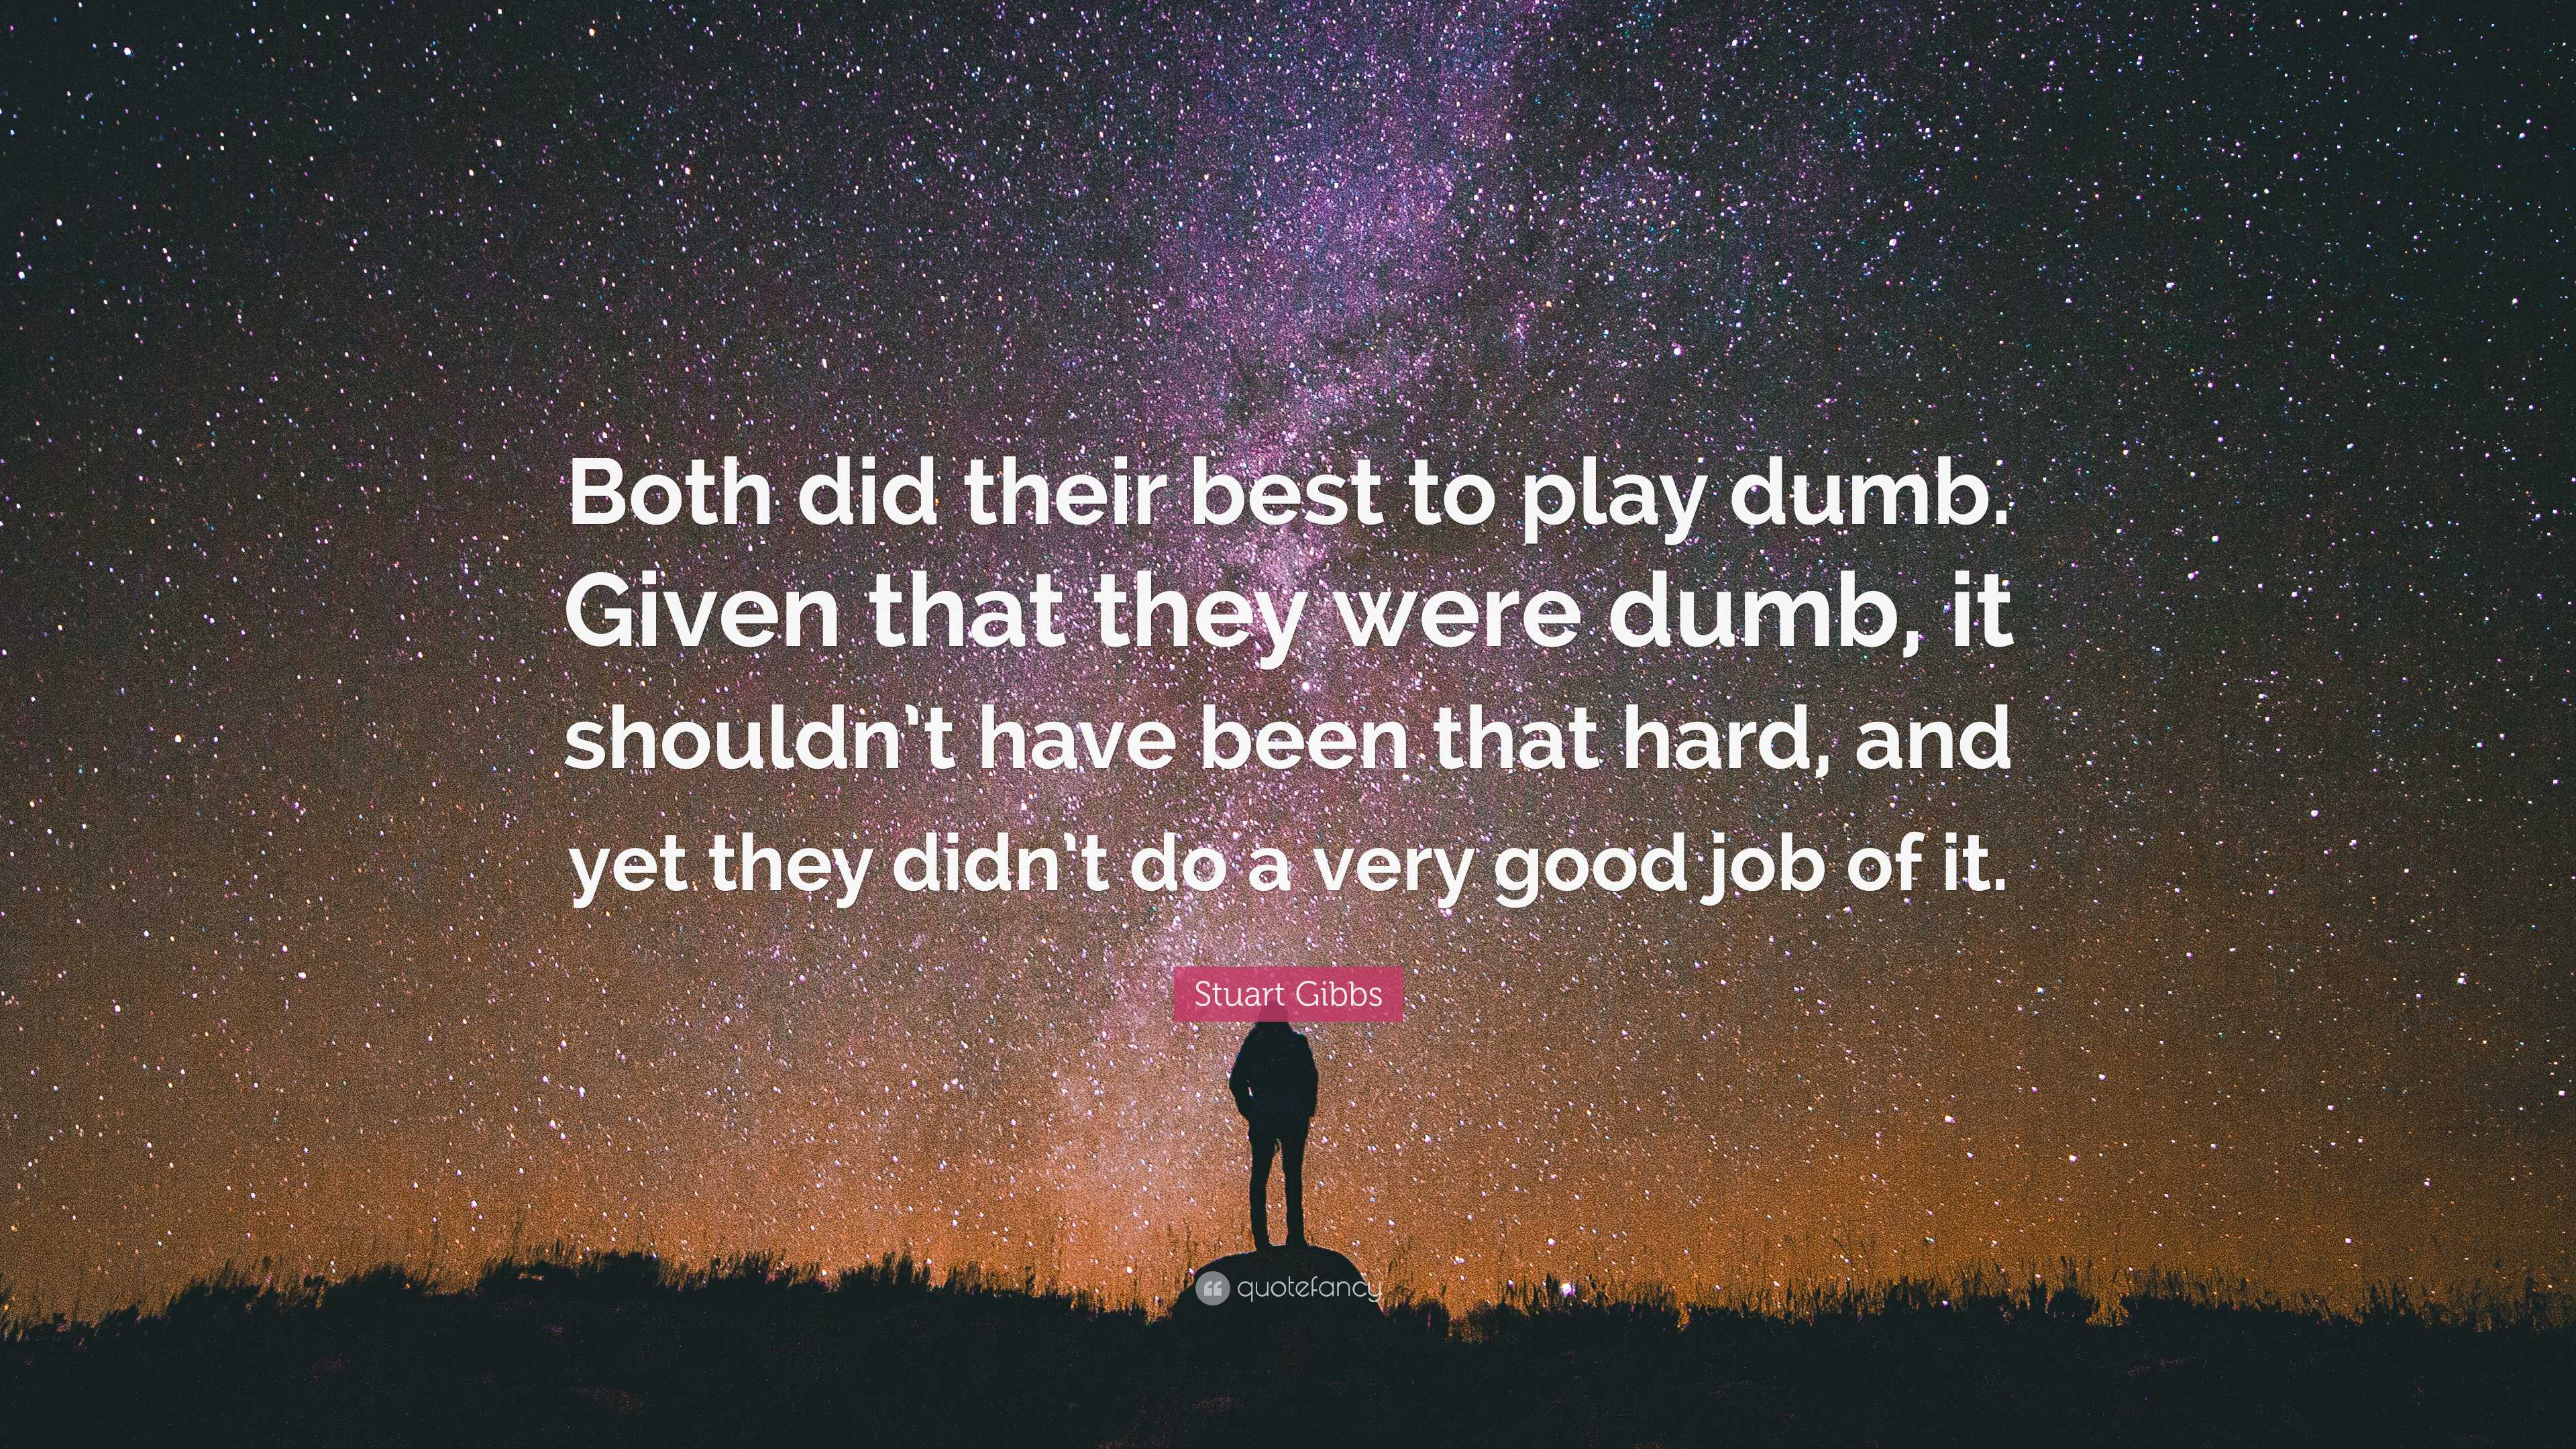 Stuart Gibbs Quote: “Both did their best to play dumb. Given that they ...